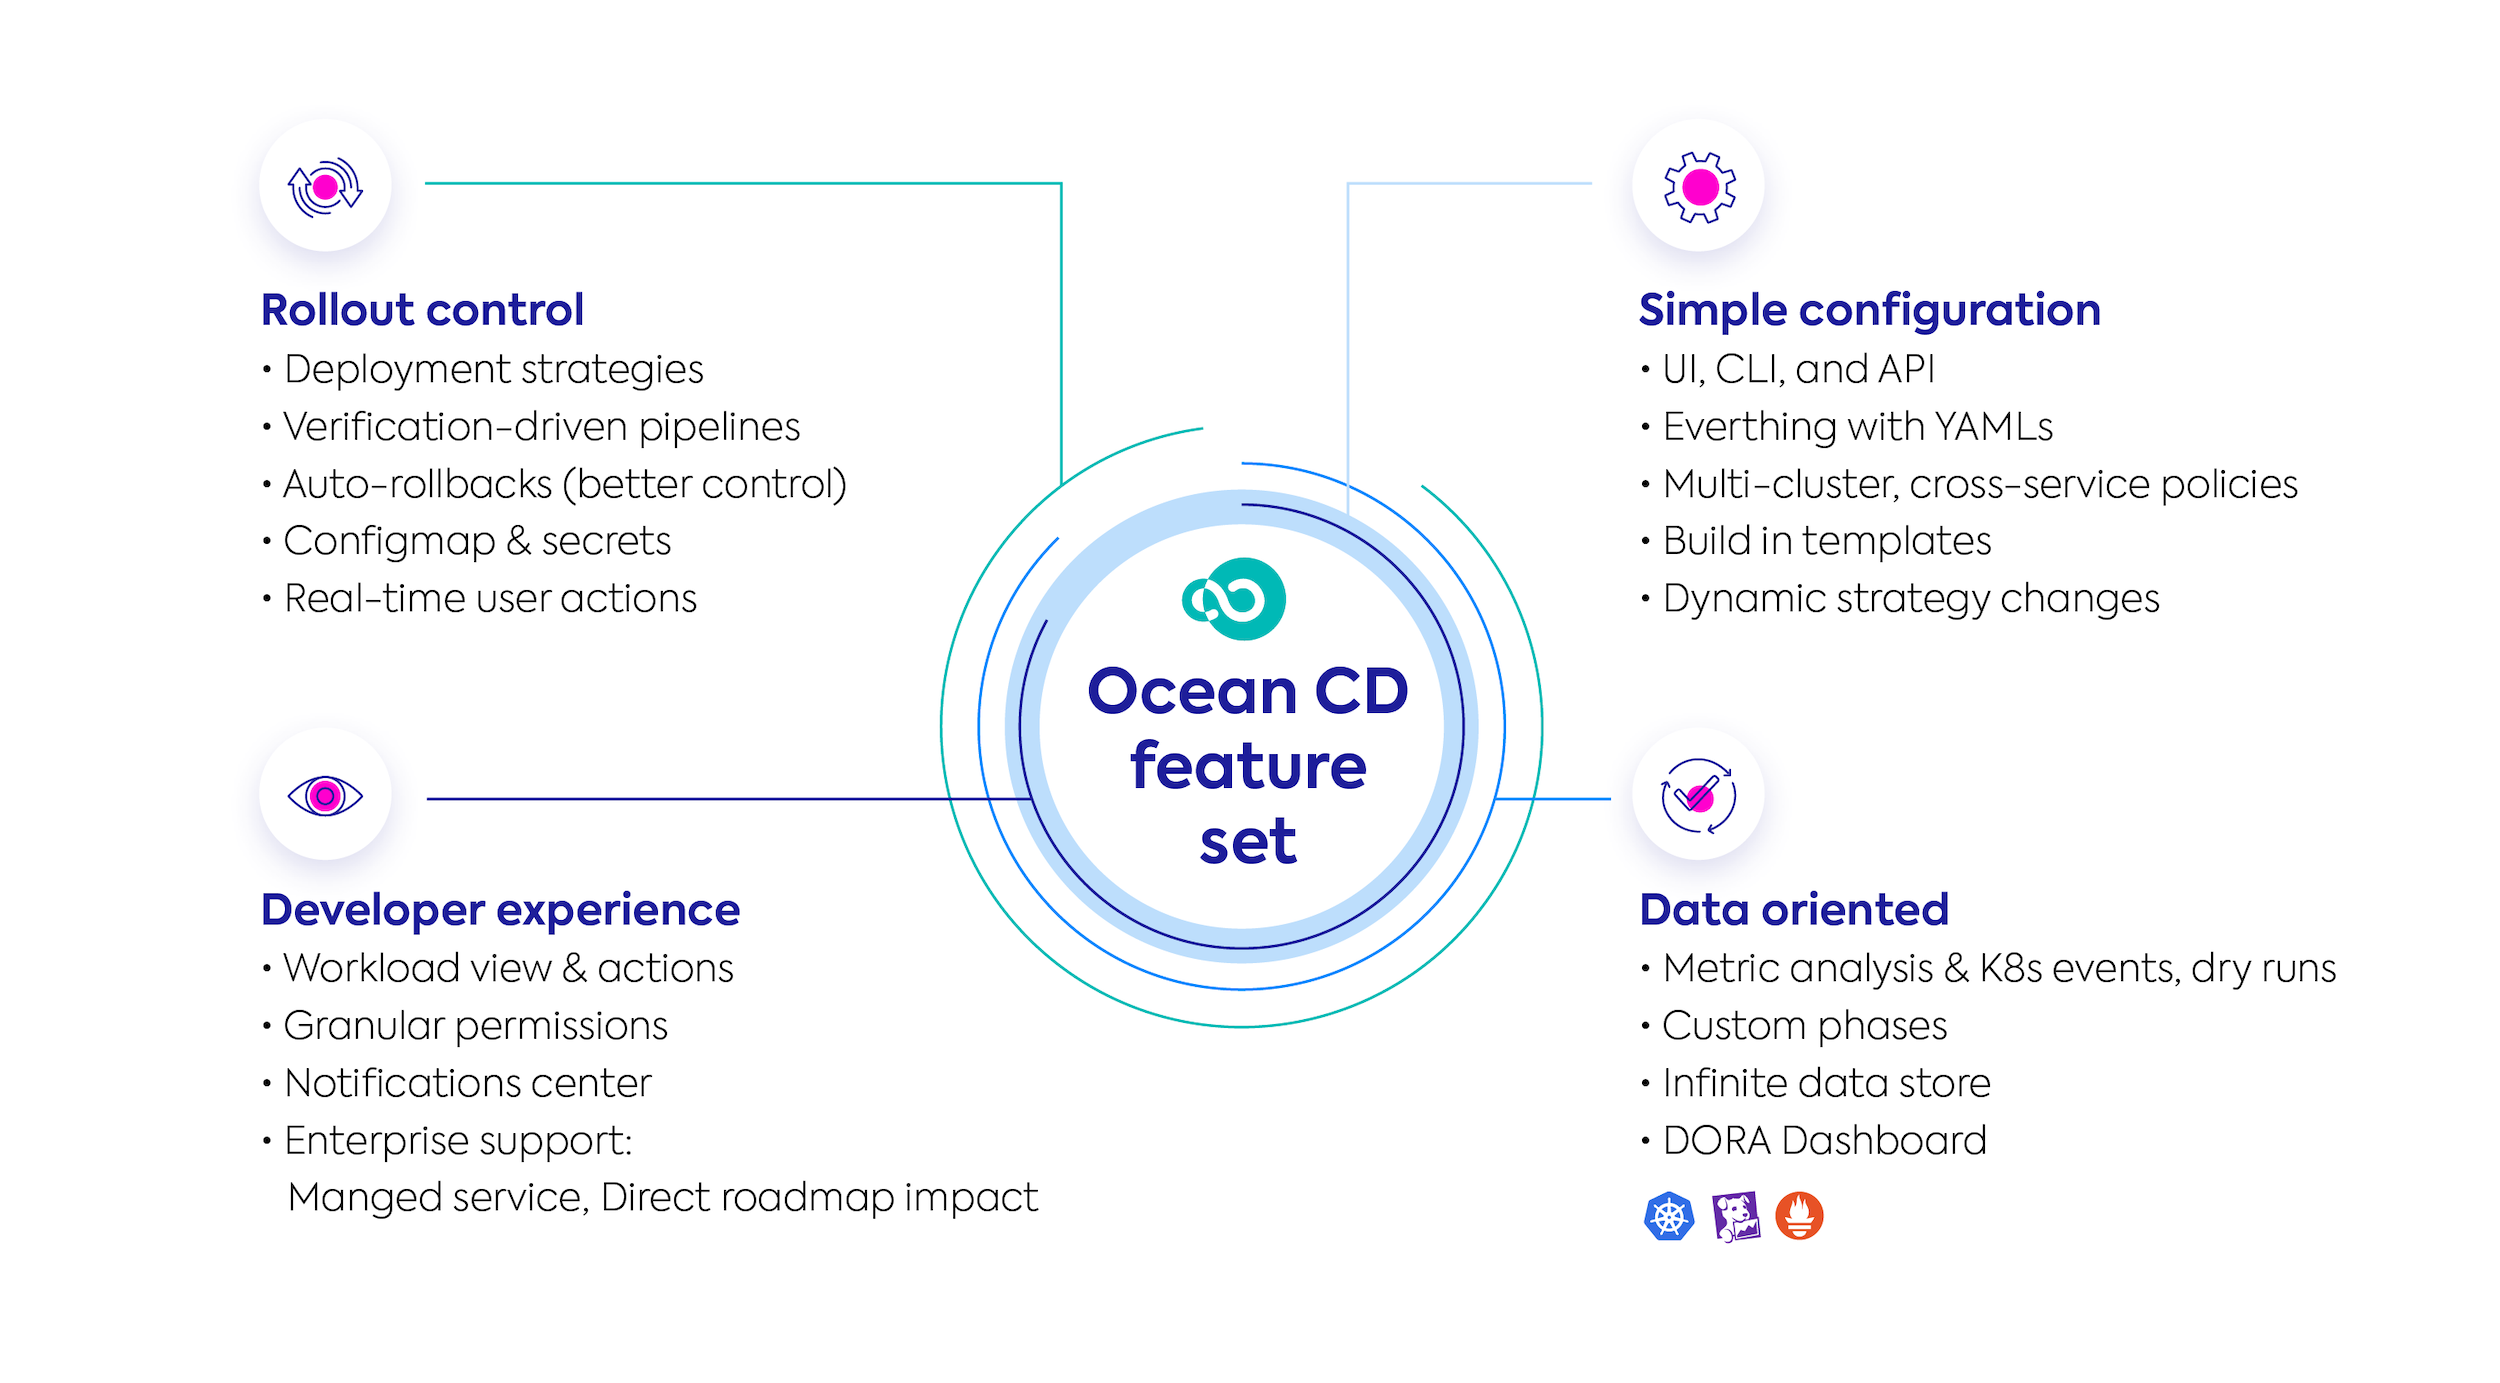 Ocean CD Feature Set Rollout control • Deployment strategies • Verification-driven pipelines • Auto-rollbacks (better control) • Configmap & secrets • Real-time user actions Simple configuration • UI, CLI, and API • Everthing with YAMLs • Multi-cluster, cross-service policies • Build in templates • Dynamic strategy changes Developer experience • Workload view & actions • Granular permissions • Notifications center • Enterprise support: Managed service, Direct roadmap impact Data oriented • Metric analysis & K8s events, dry runs • Custom phases • Infinite data store • DORA Dashboard